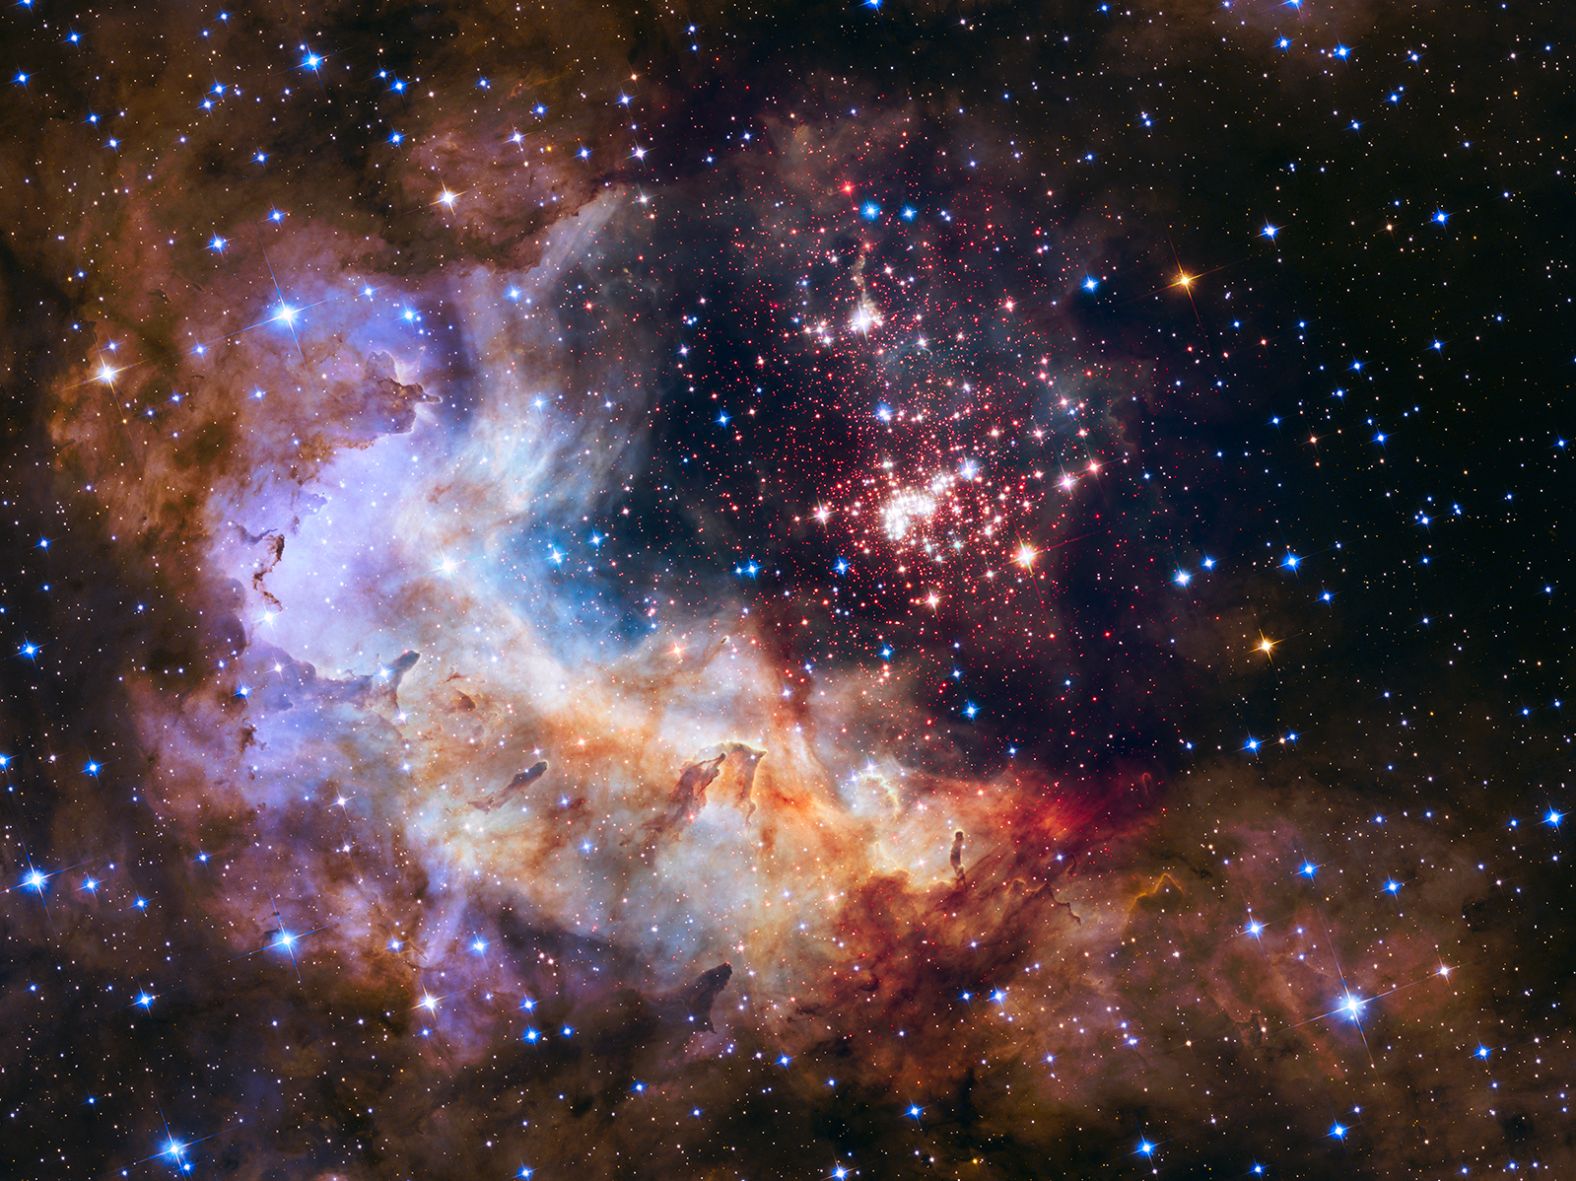 Fireworks are even more beautiful in space. Hubble captured this image of a giant cluster of 3,000 stars in 2015. It's called Westerlund 2, located 20,000 light-years away from Earth.